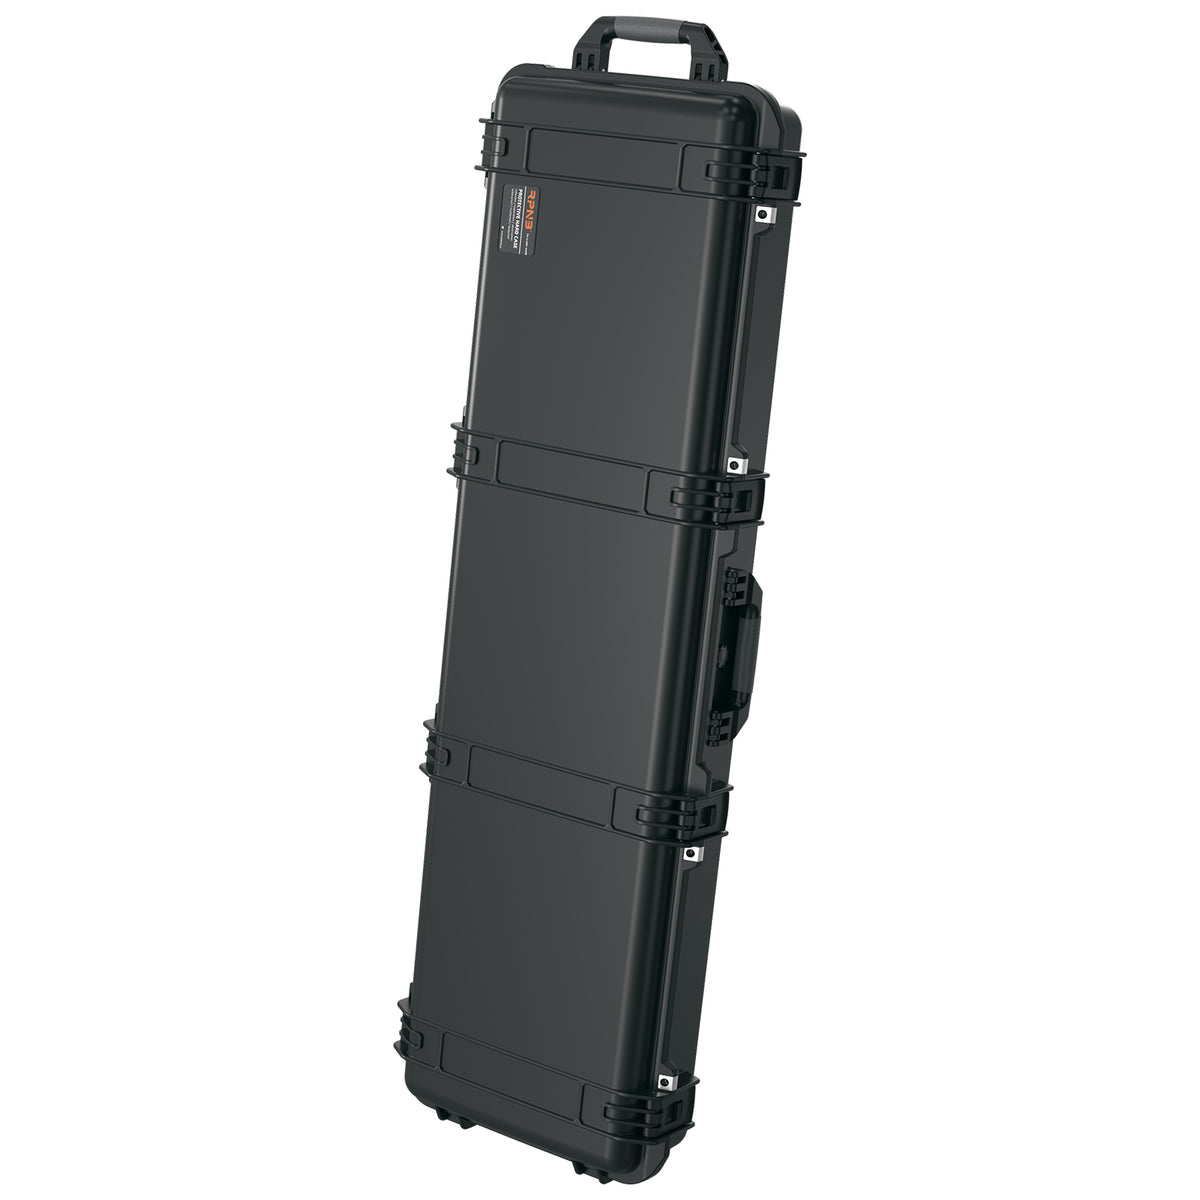 RPNB PP-12150 Weatherproof Hard Rifle Case with Customizable Foam Insert Standing Straight Up